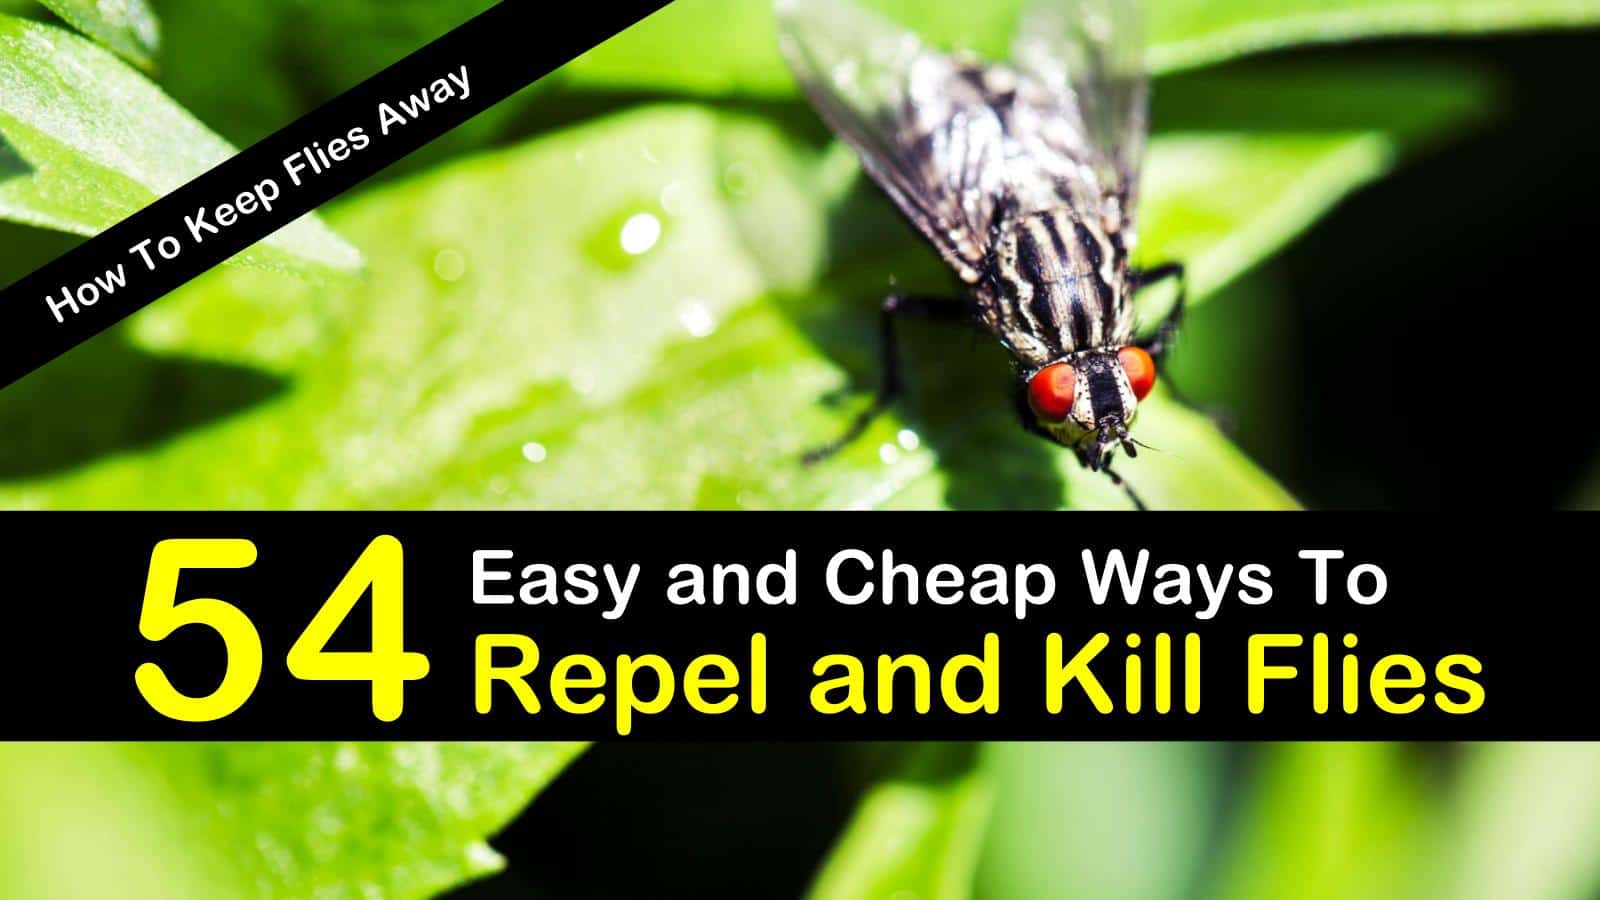 How To Keep Flies Away 54 Easy And Cheap Ways To Repel And Kill Flies